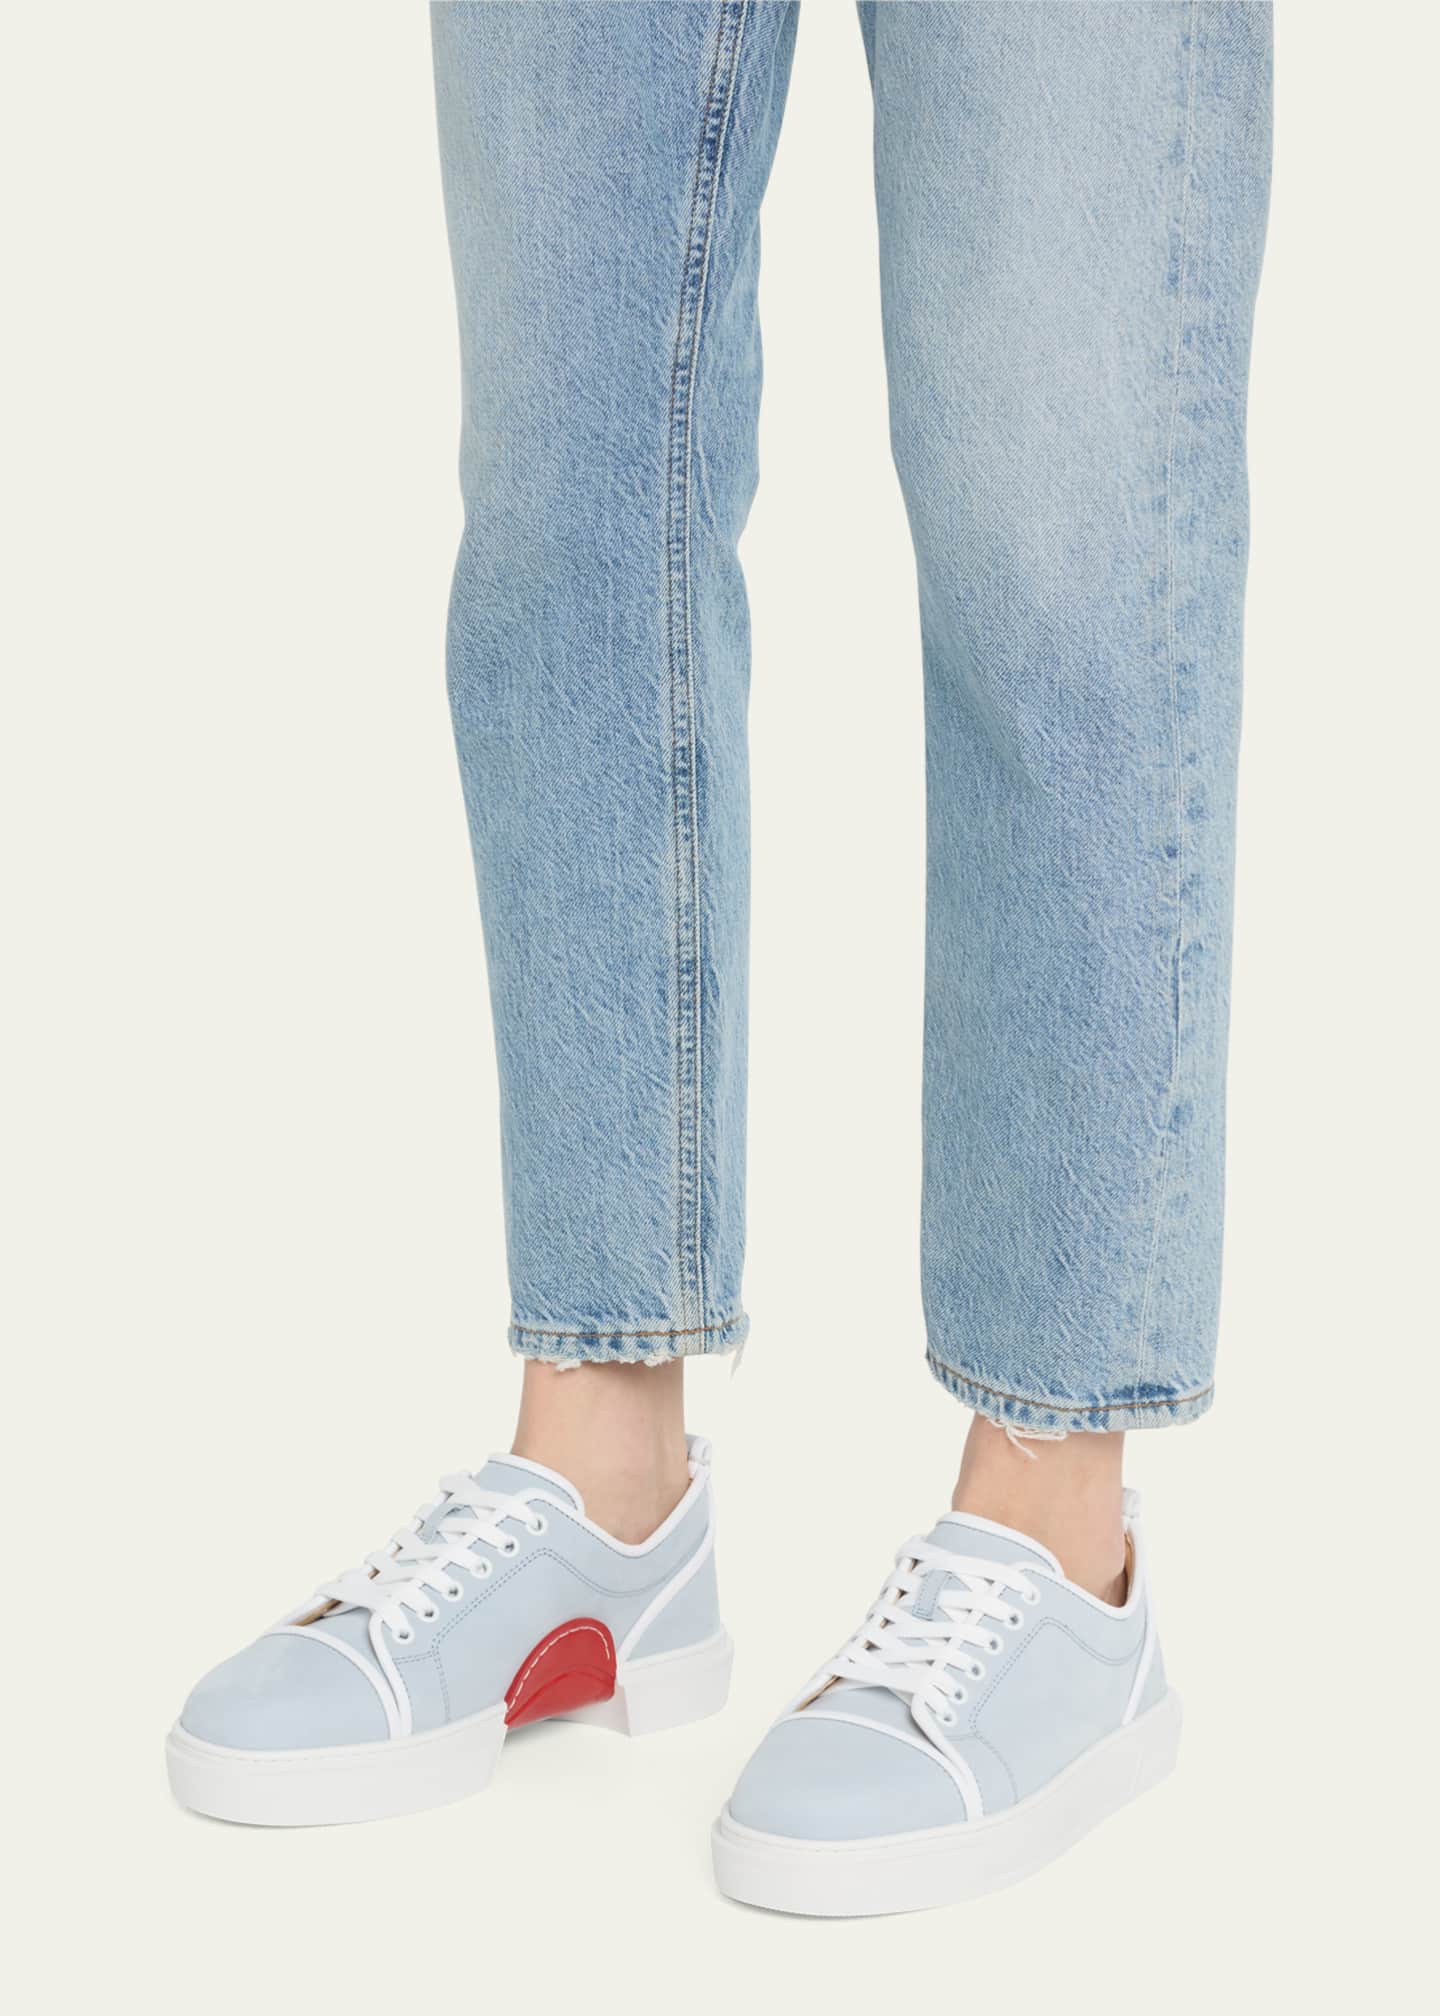 Christian Louboutin Adolon Donna Red Sole Low-Top Sneakers - Bergdorf ...